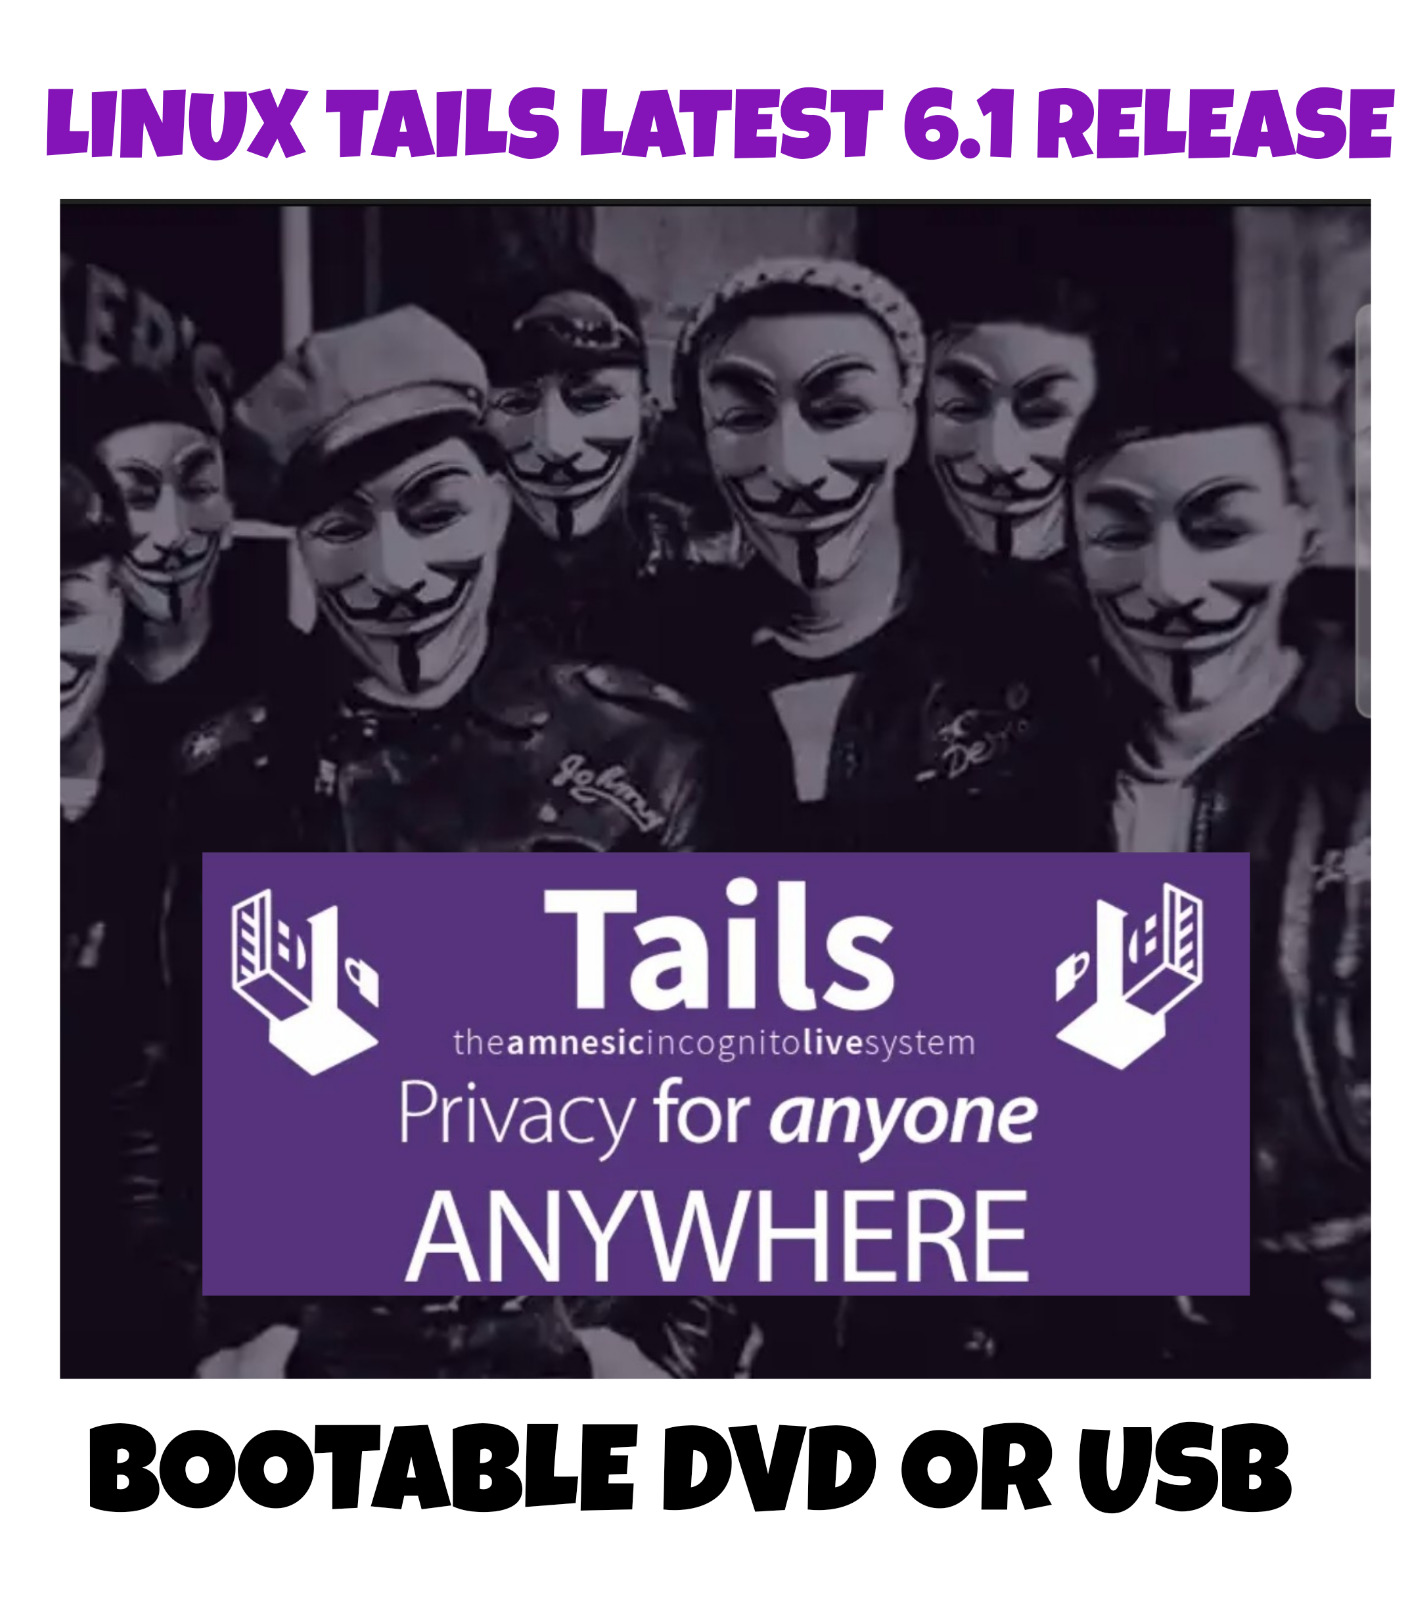 LINUX TAILS BRAND NEW 6.2 NEW RELEASE BOOTABLE USB/DVD, SECURE, ANONYMOUS,LIVE